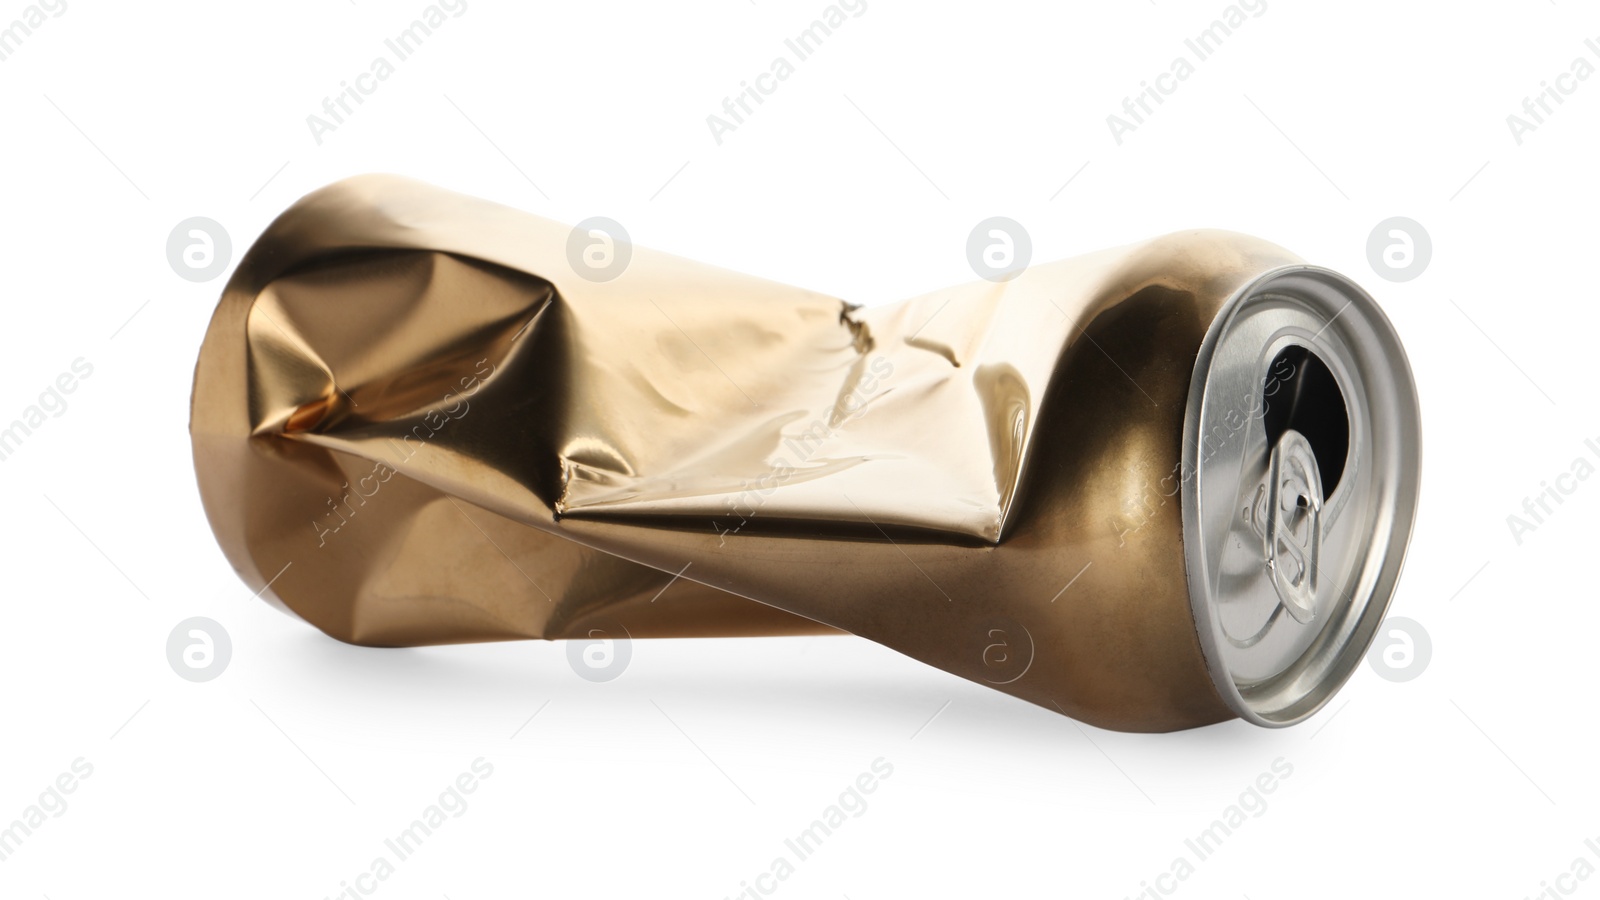 Photo of Golden crumpled can with ring isolated on white